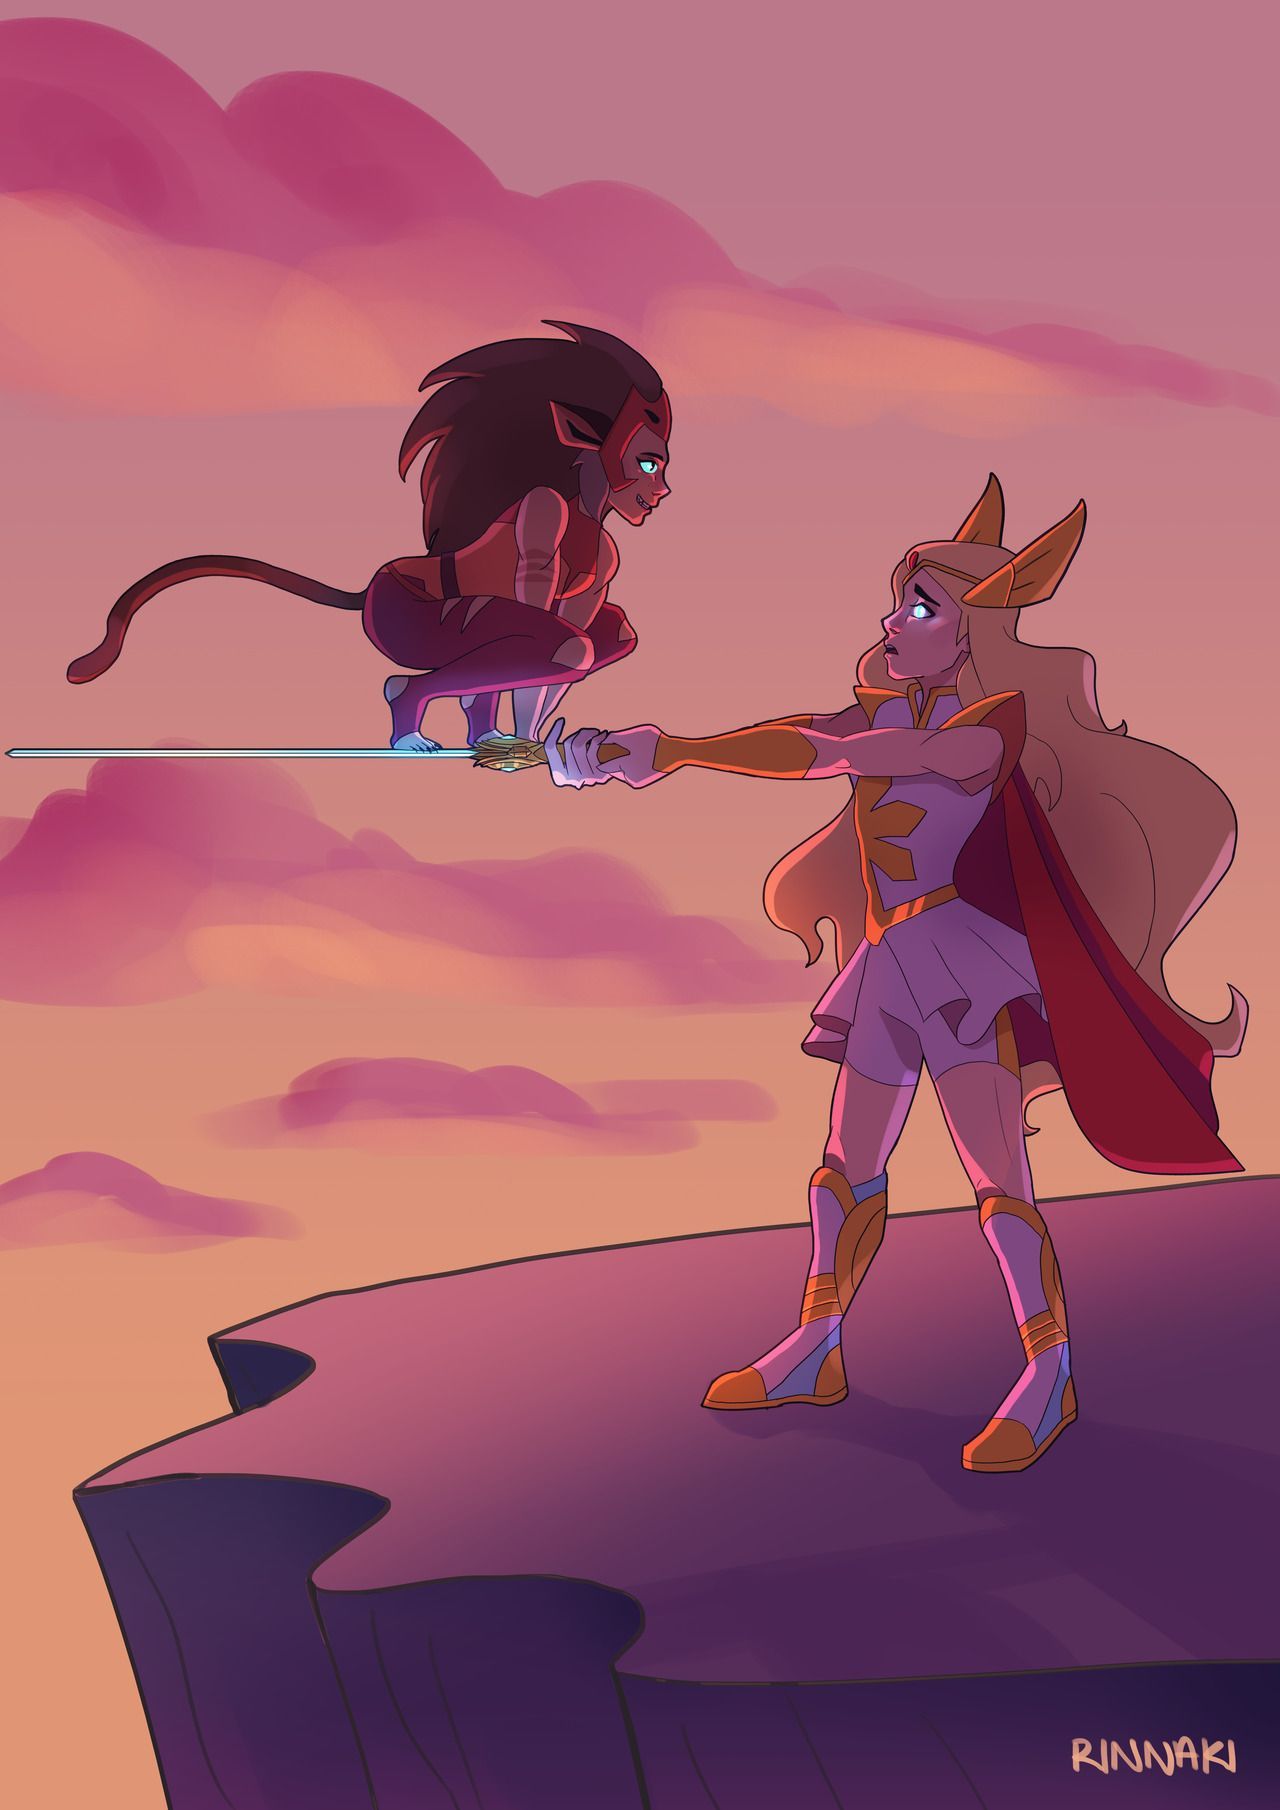 More She Ra And Catra, I Love These Two So Much Catra In Her Suit Pulling Adora In To Dance Like Ahh I'm Not Screa. She Ra Princess Of Power, She Ra